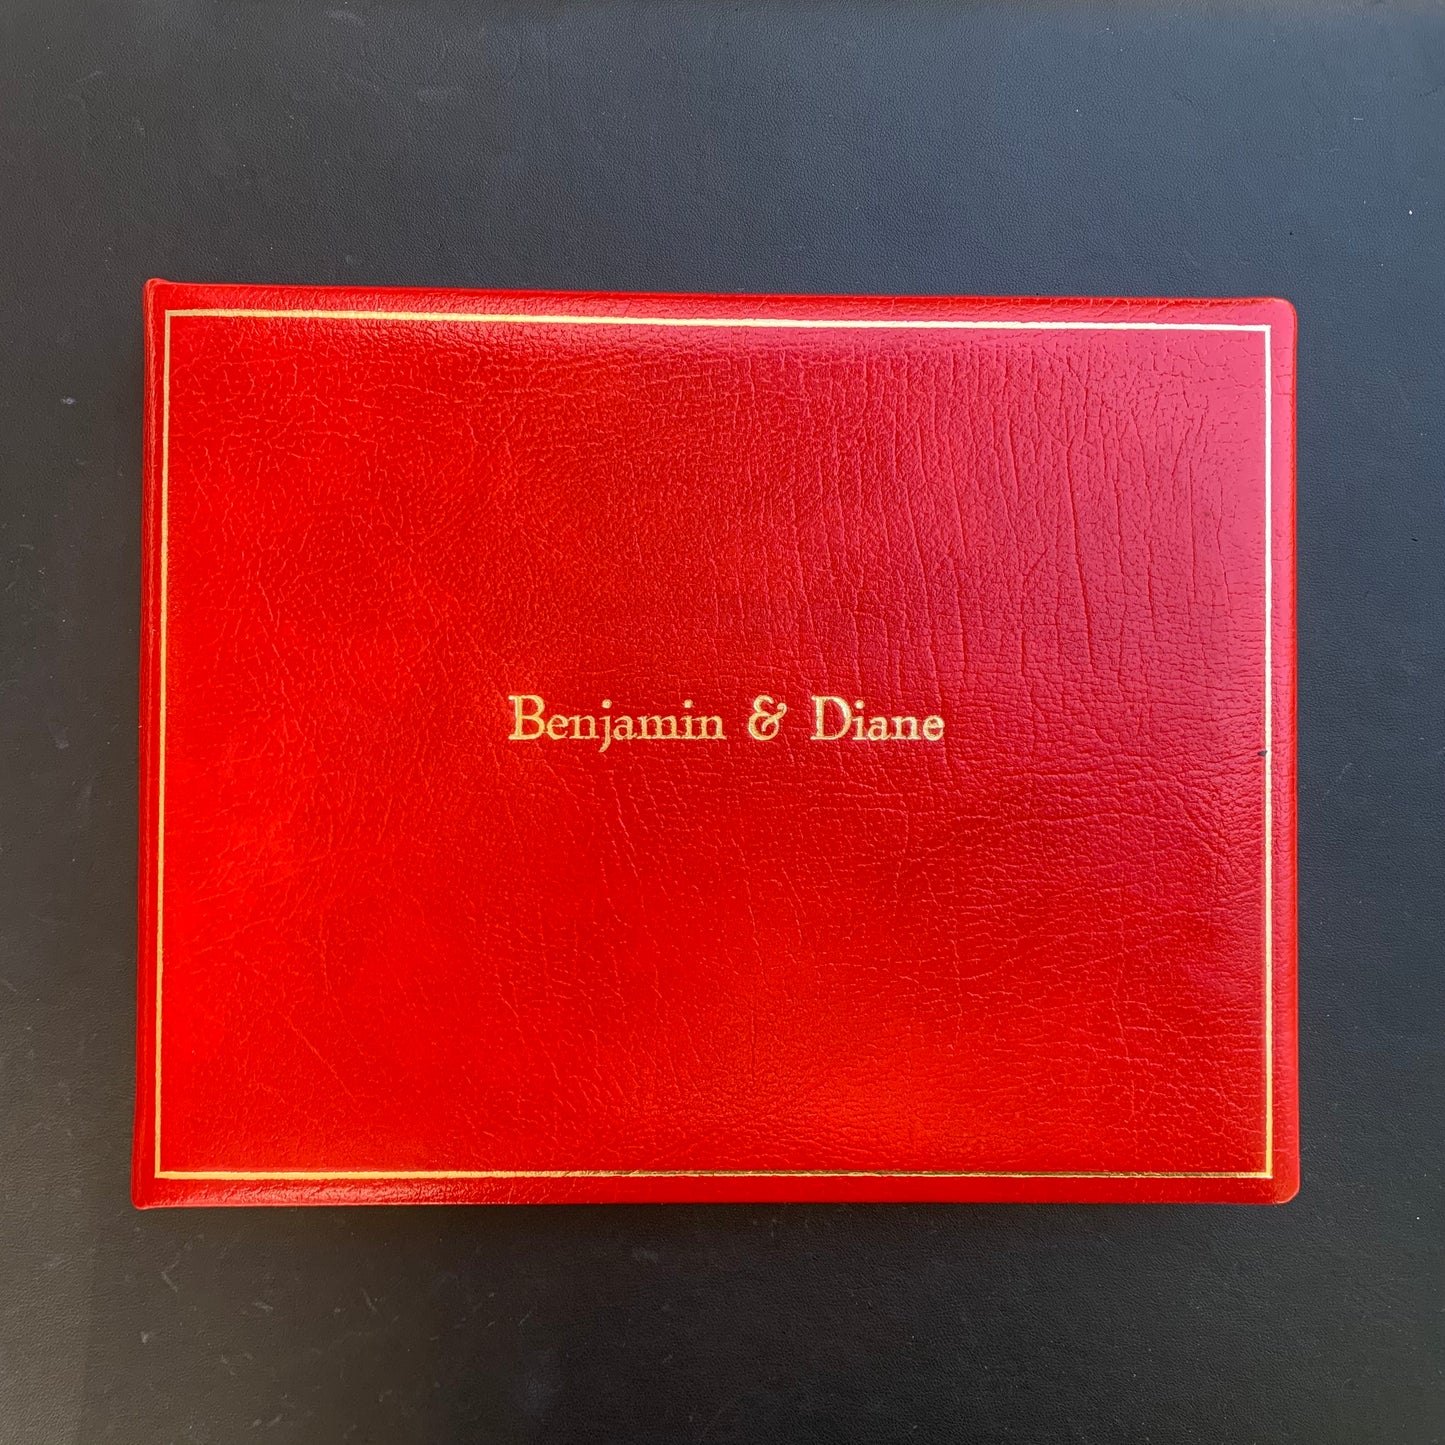 Benjamin & Diane Wedding Book  | 7 by 9 Inches | Calf Leather | Made in England